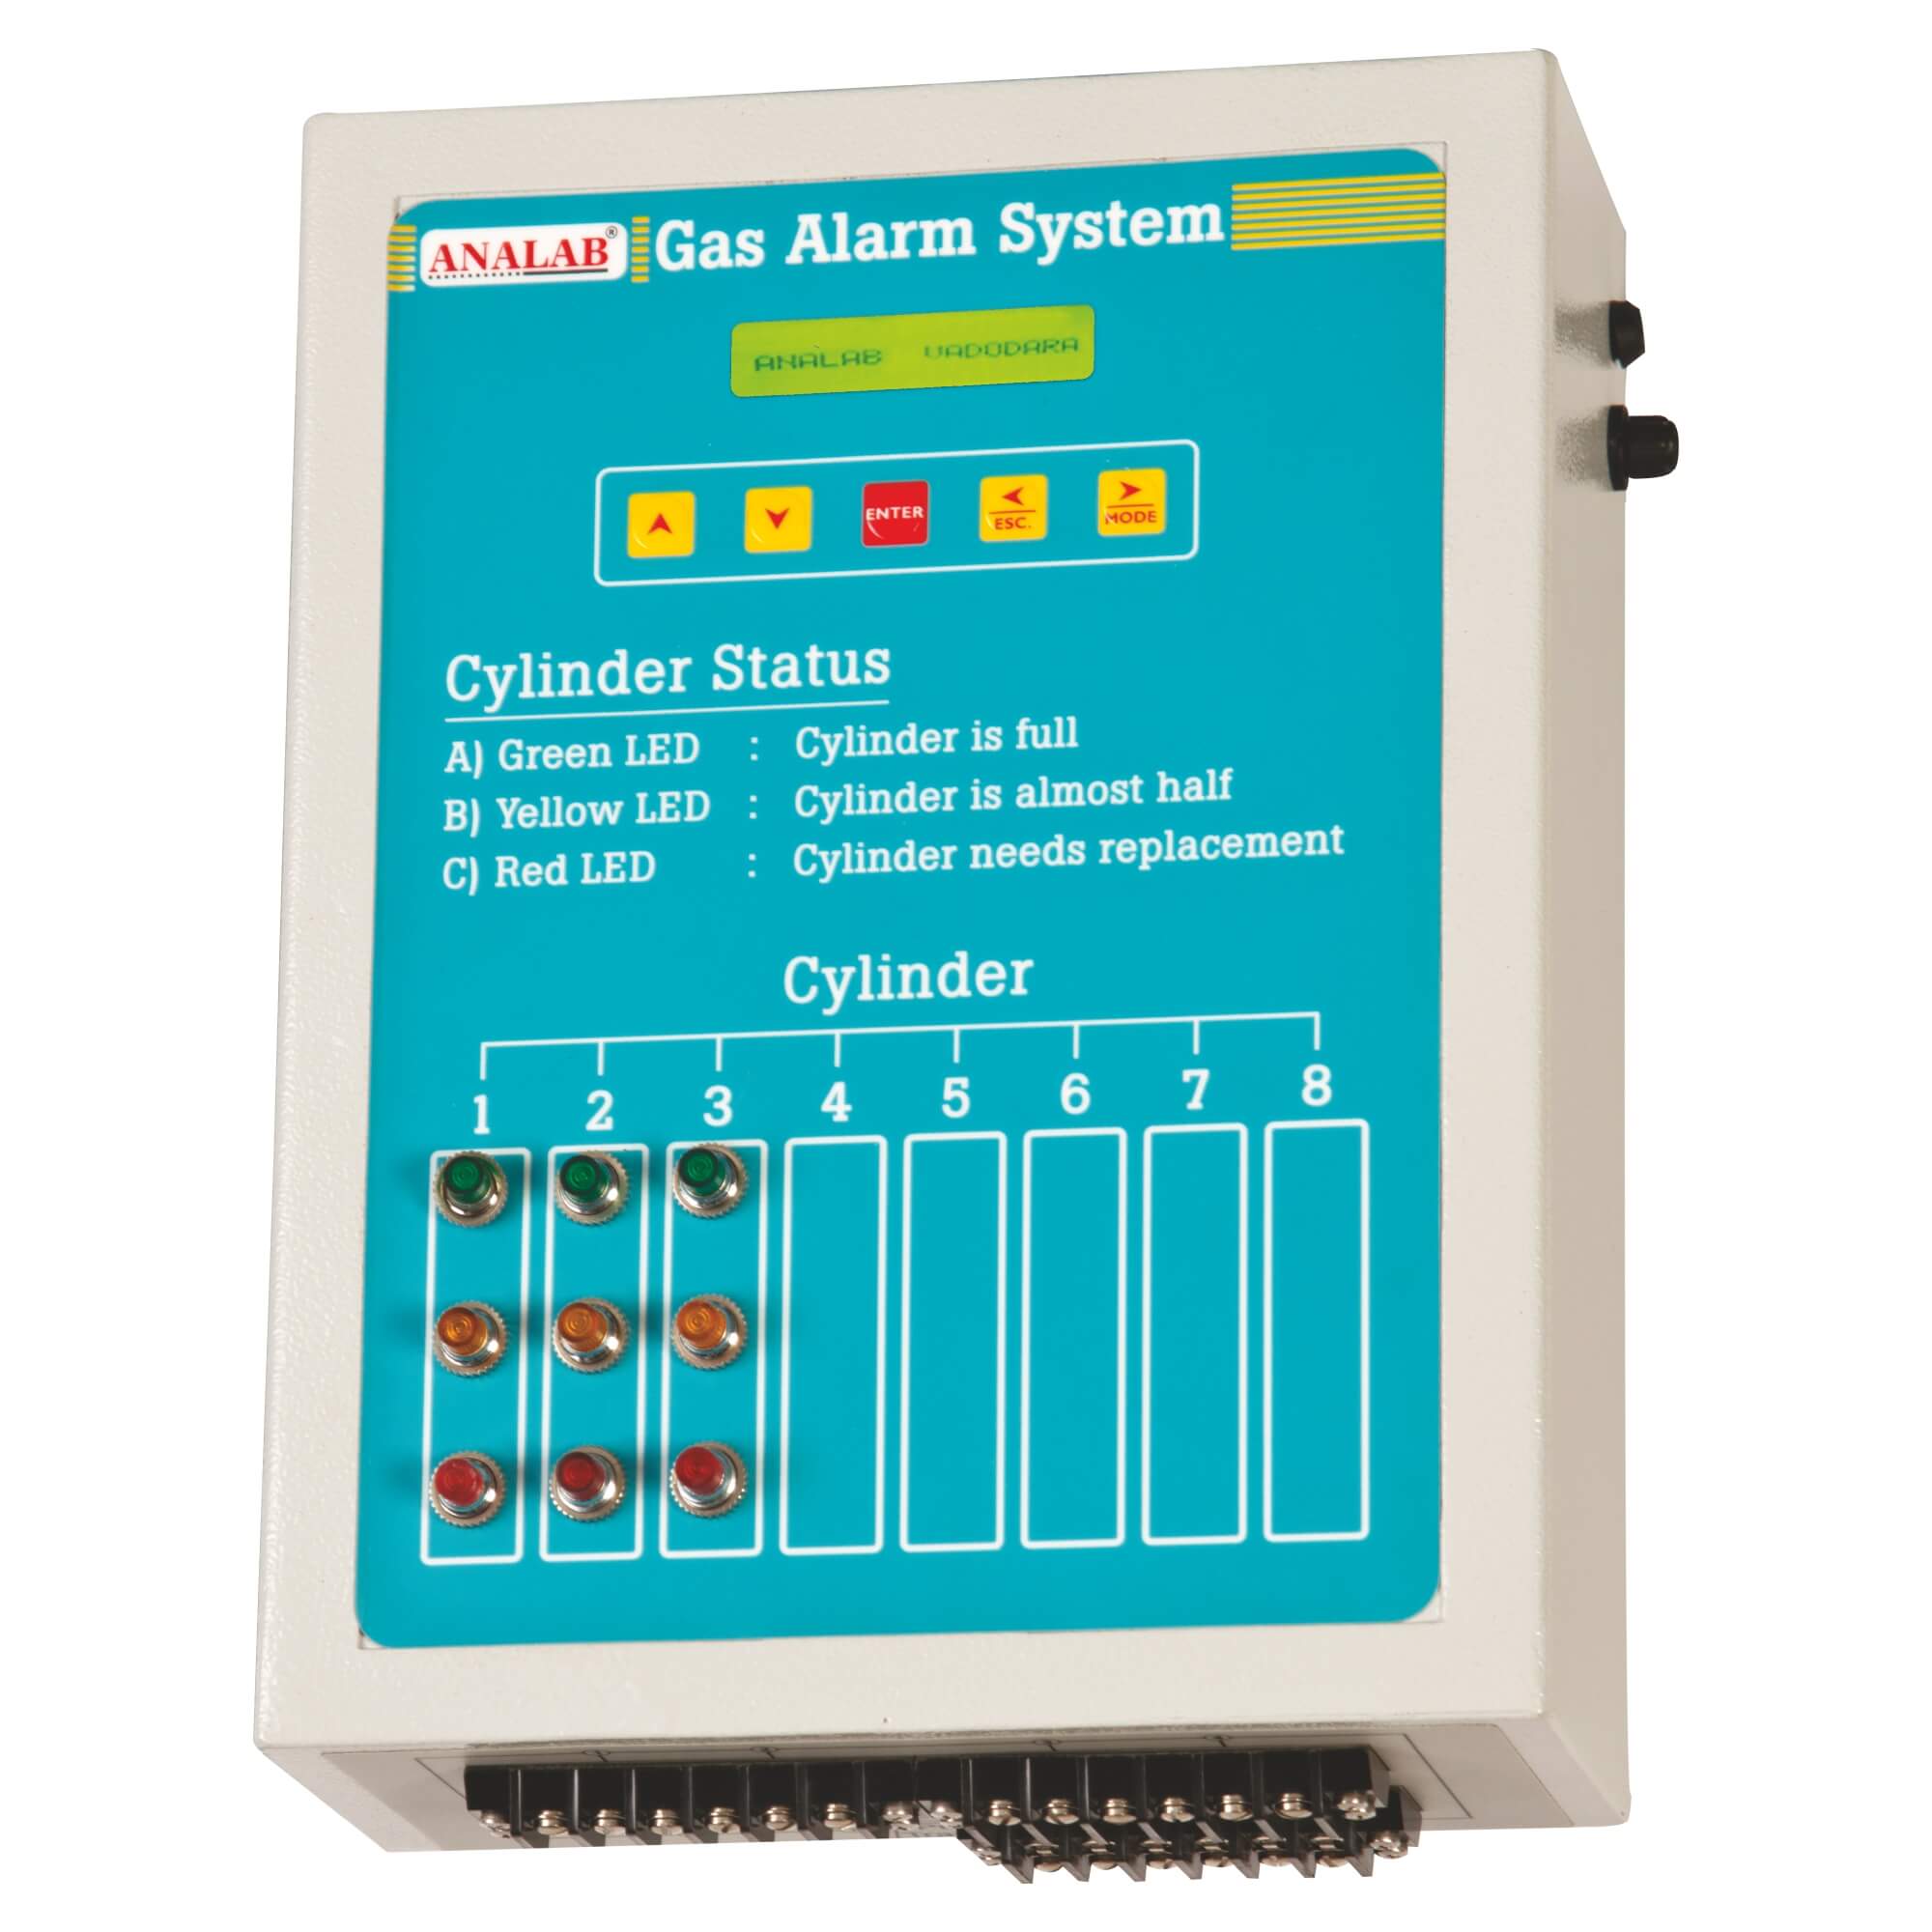 Gas Alarm System Manufacturer in India